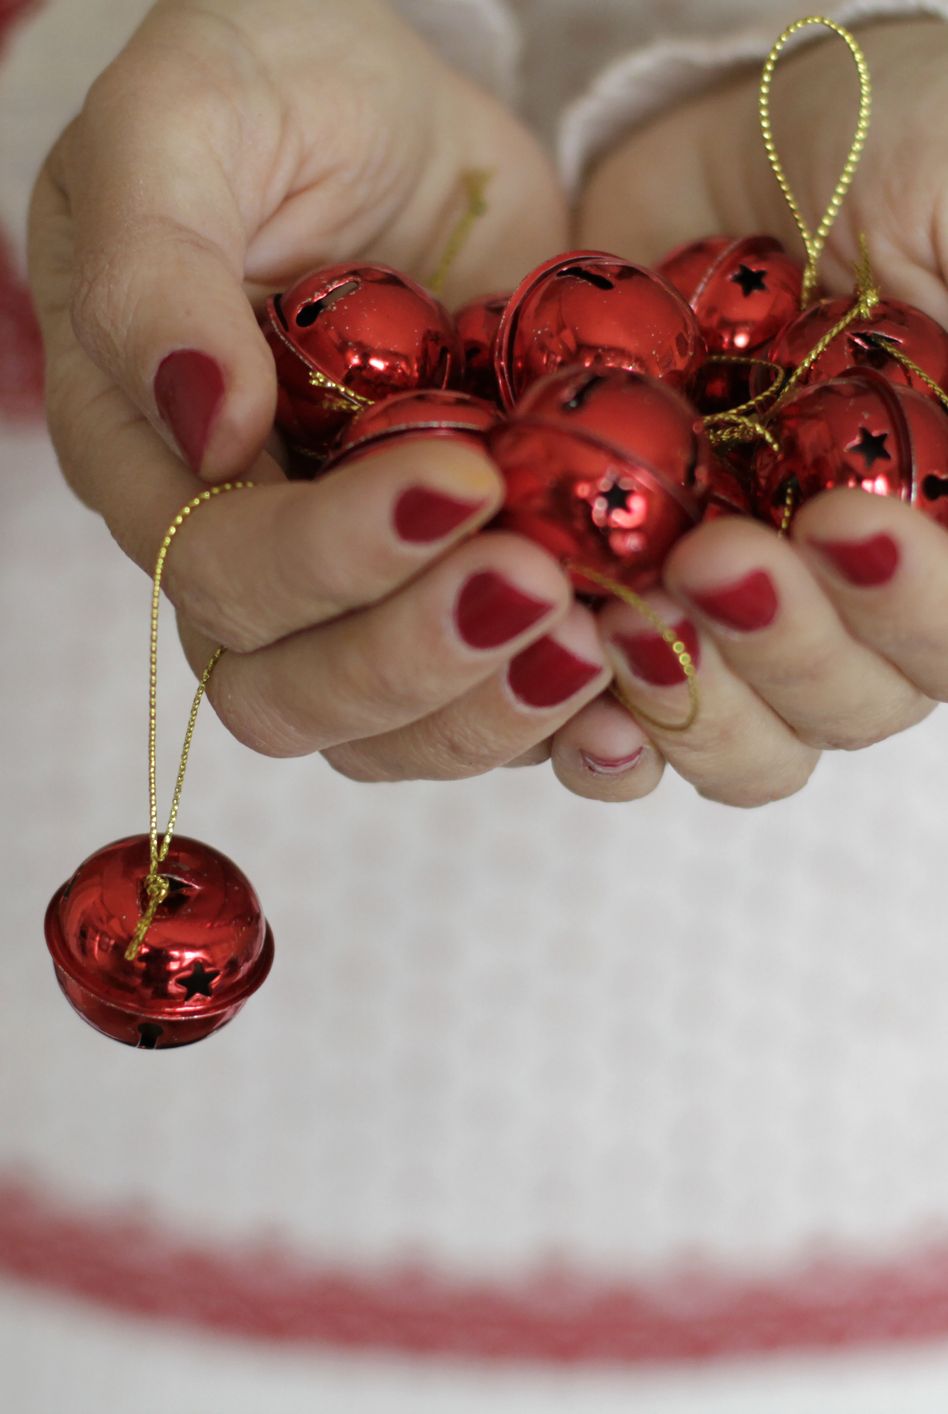 30 Best Christmas Party Game Ideas Your Guests Will Love